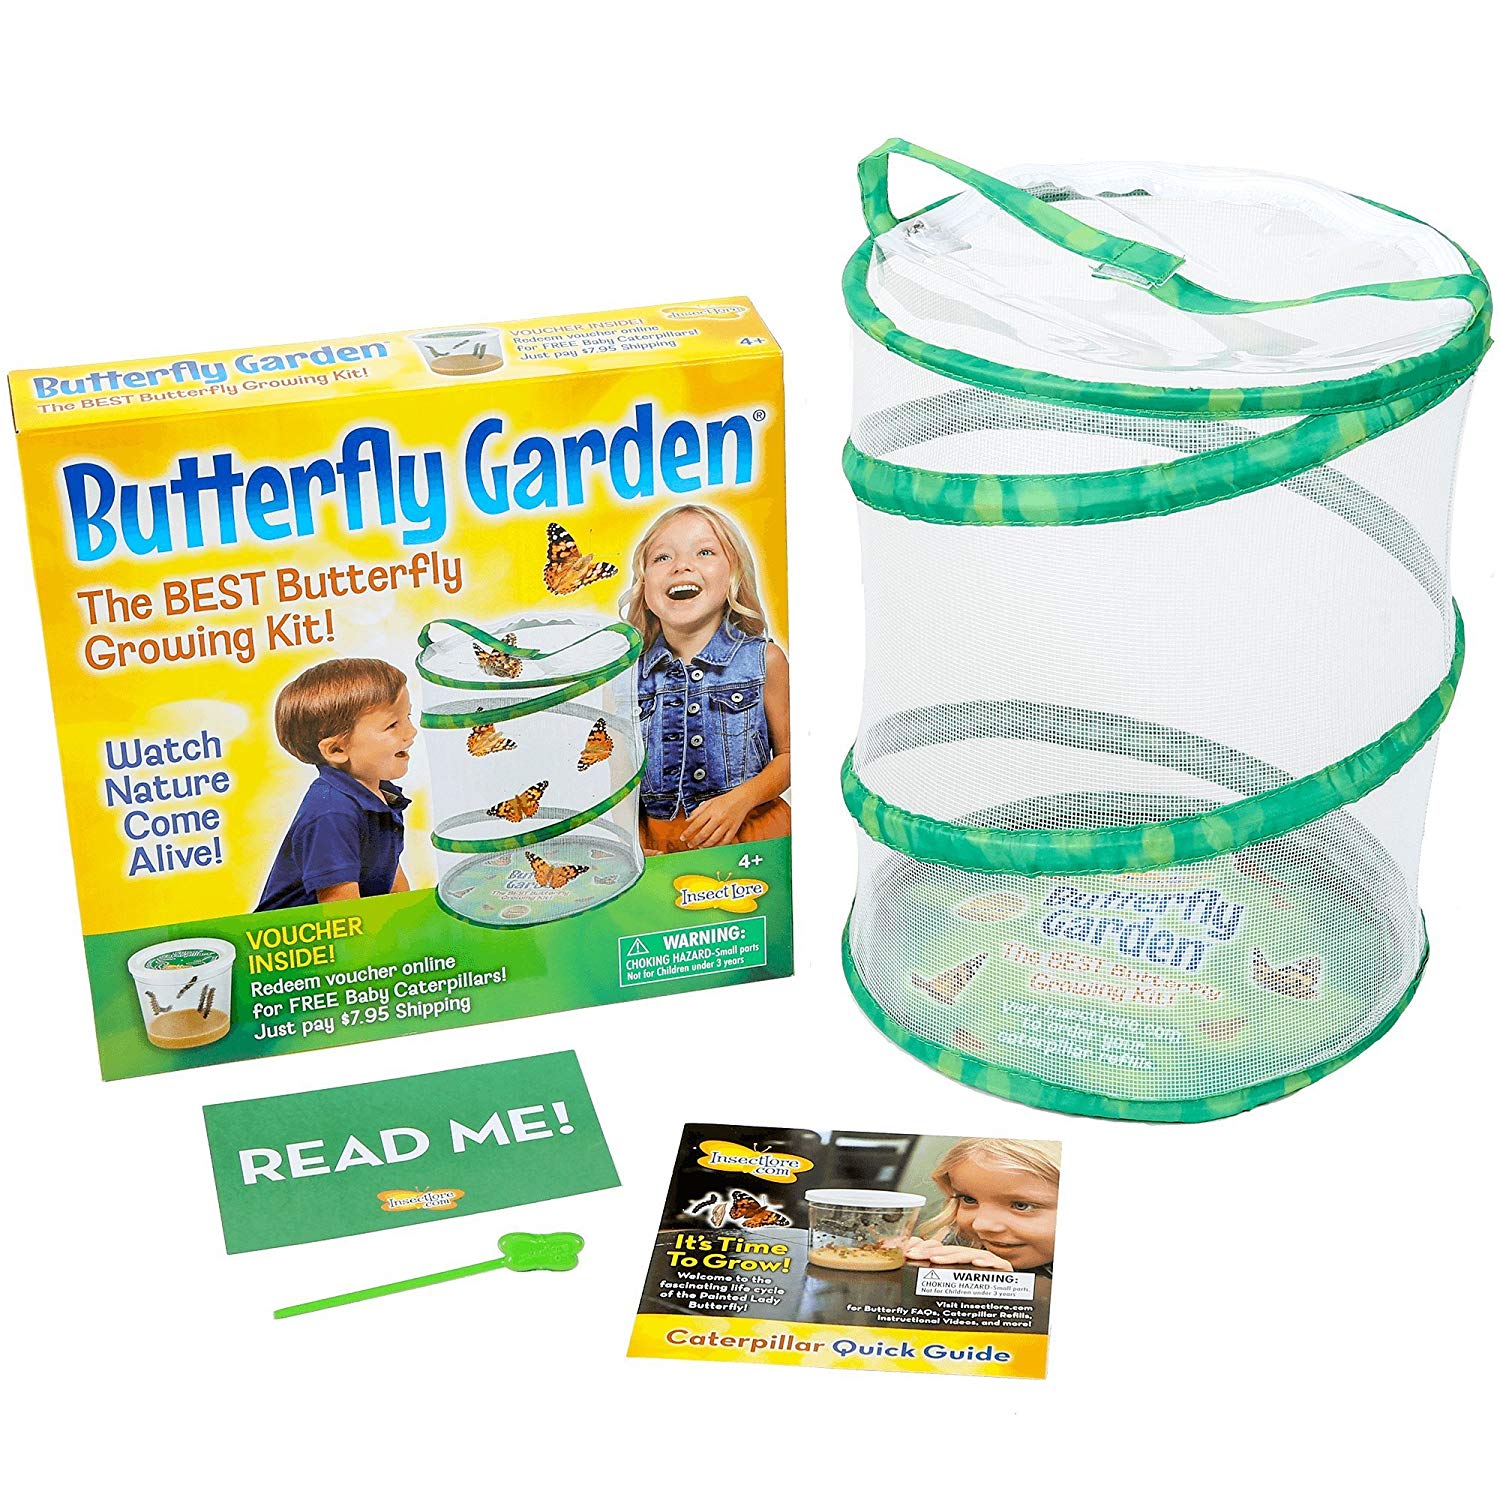 Monarch Caterpillar Kits — Sharing The Butterfly Experience